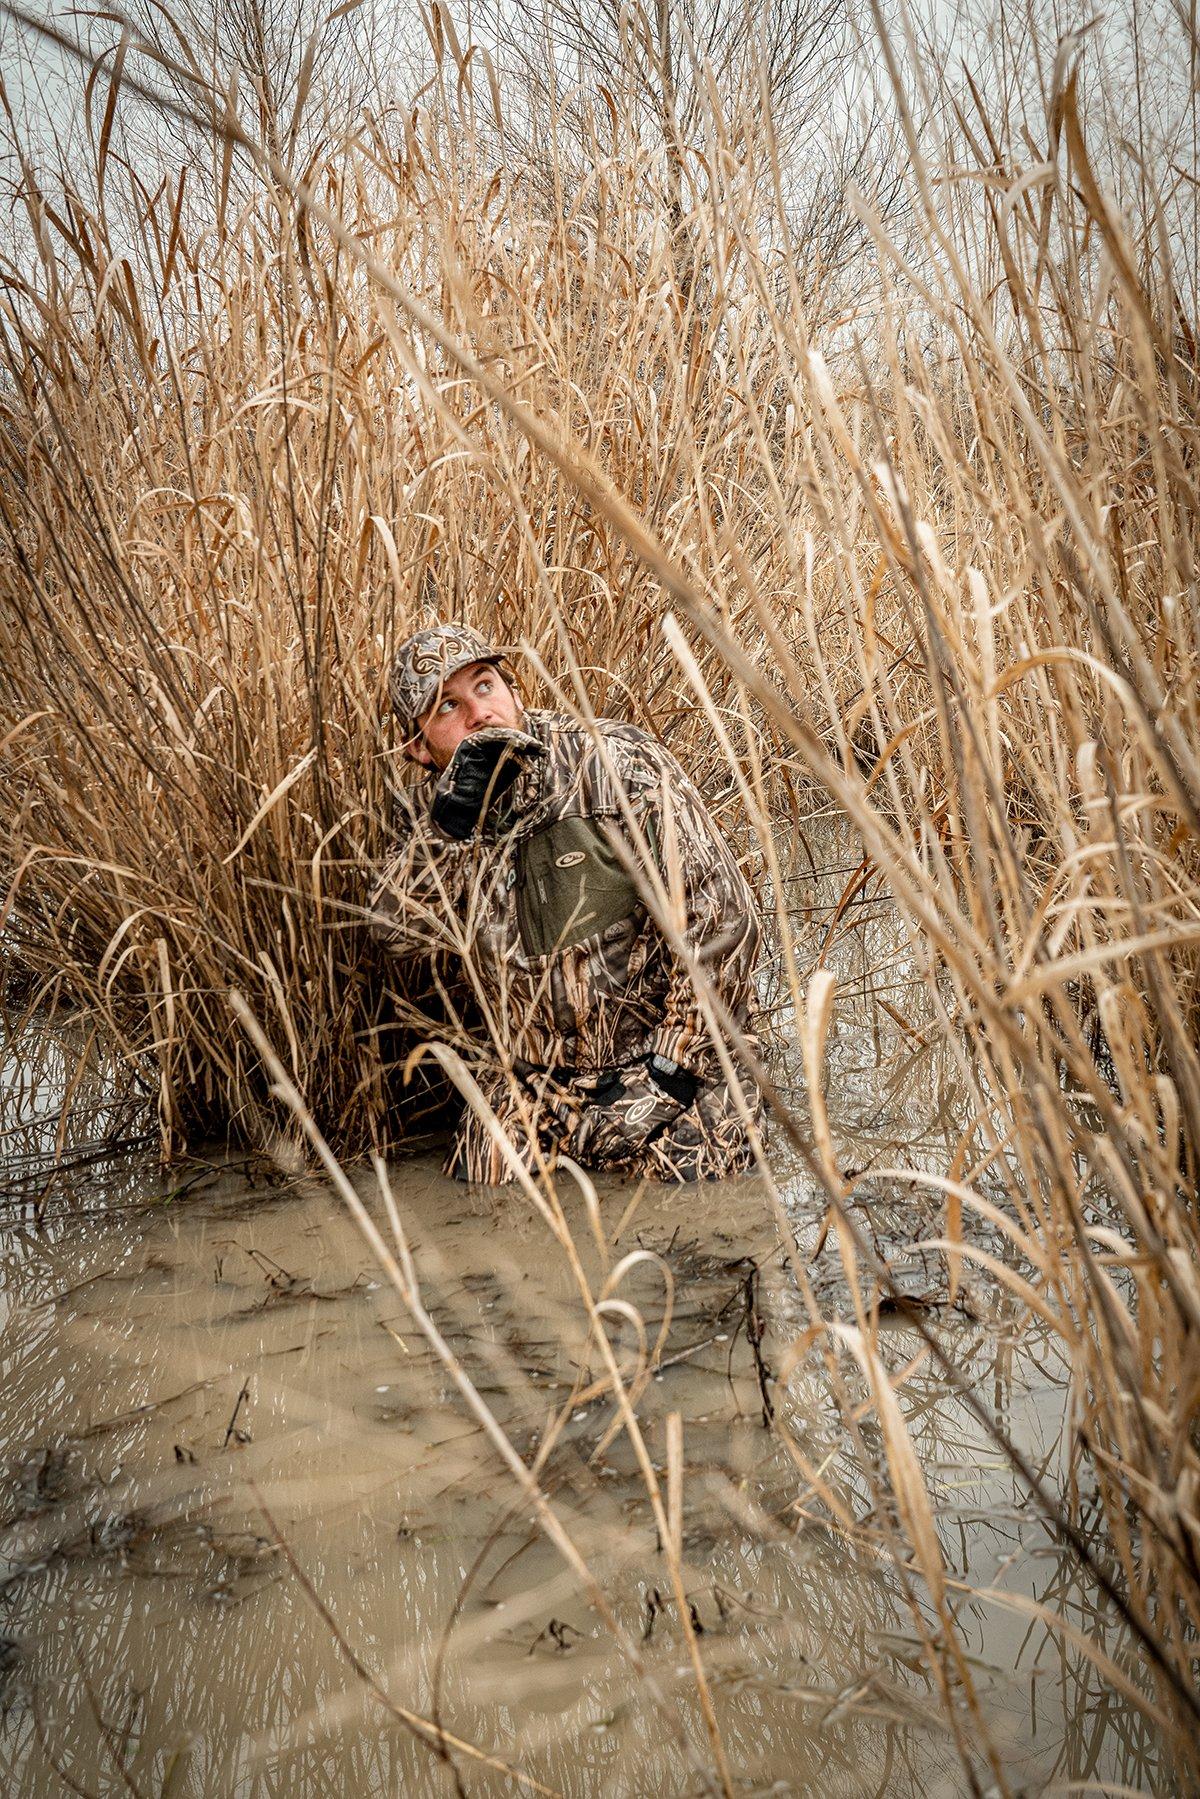 The carefully selected color palette of MAX-7 contains precise shadowing and contrast, plus high-definition imagery to make it a top-performing camouflage pattern for waterfowl hunters.